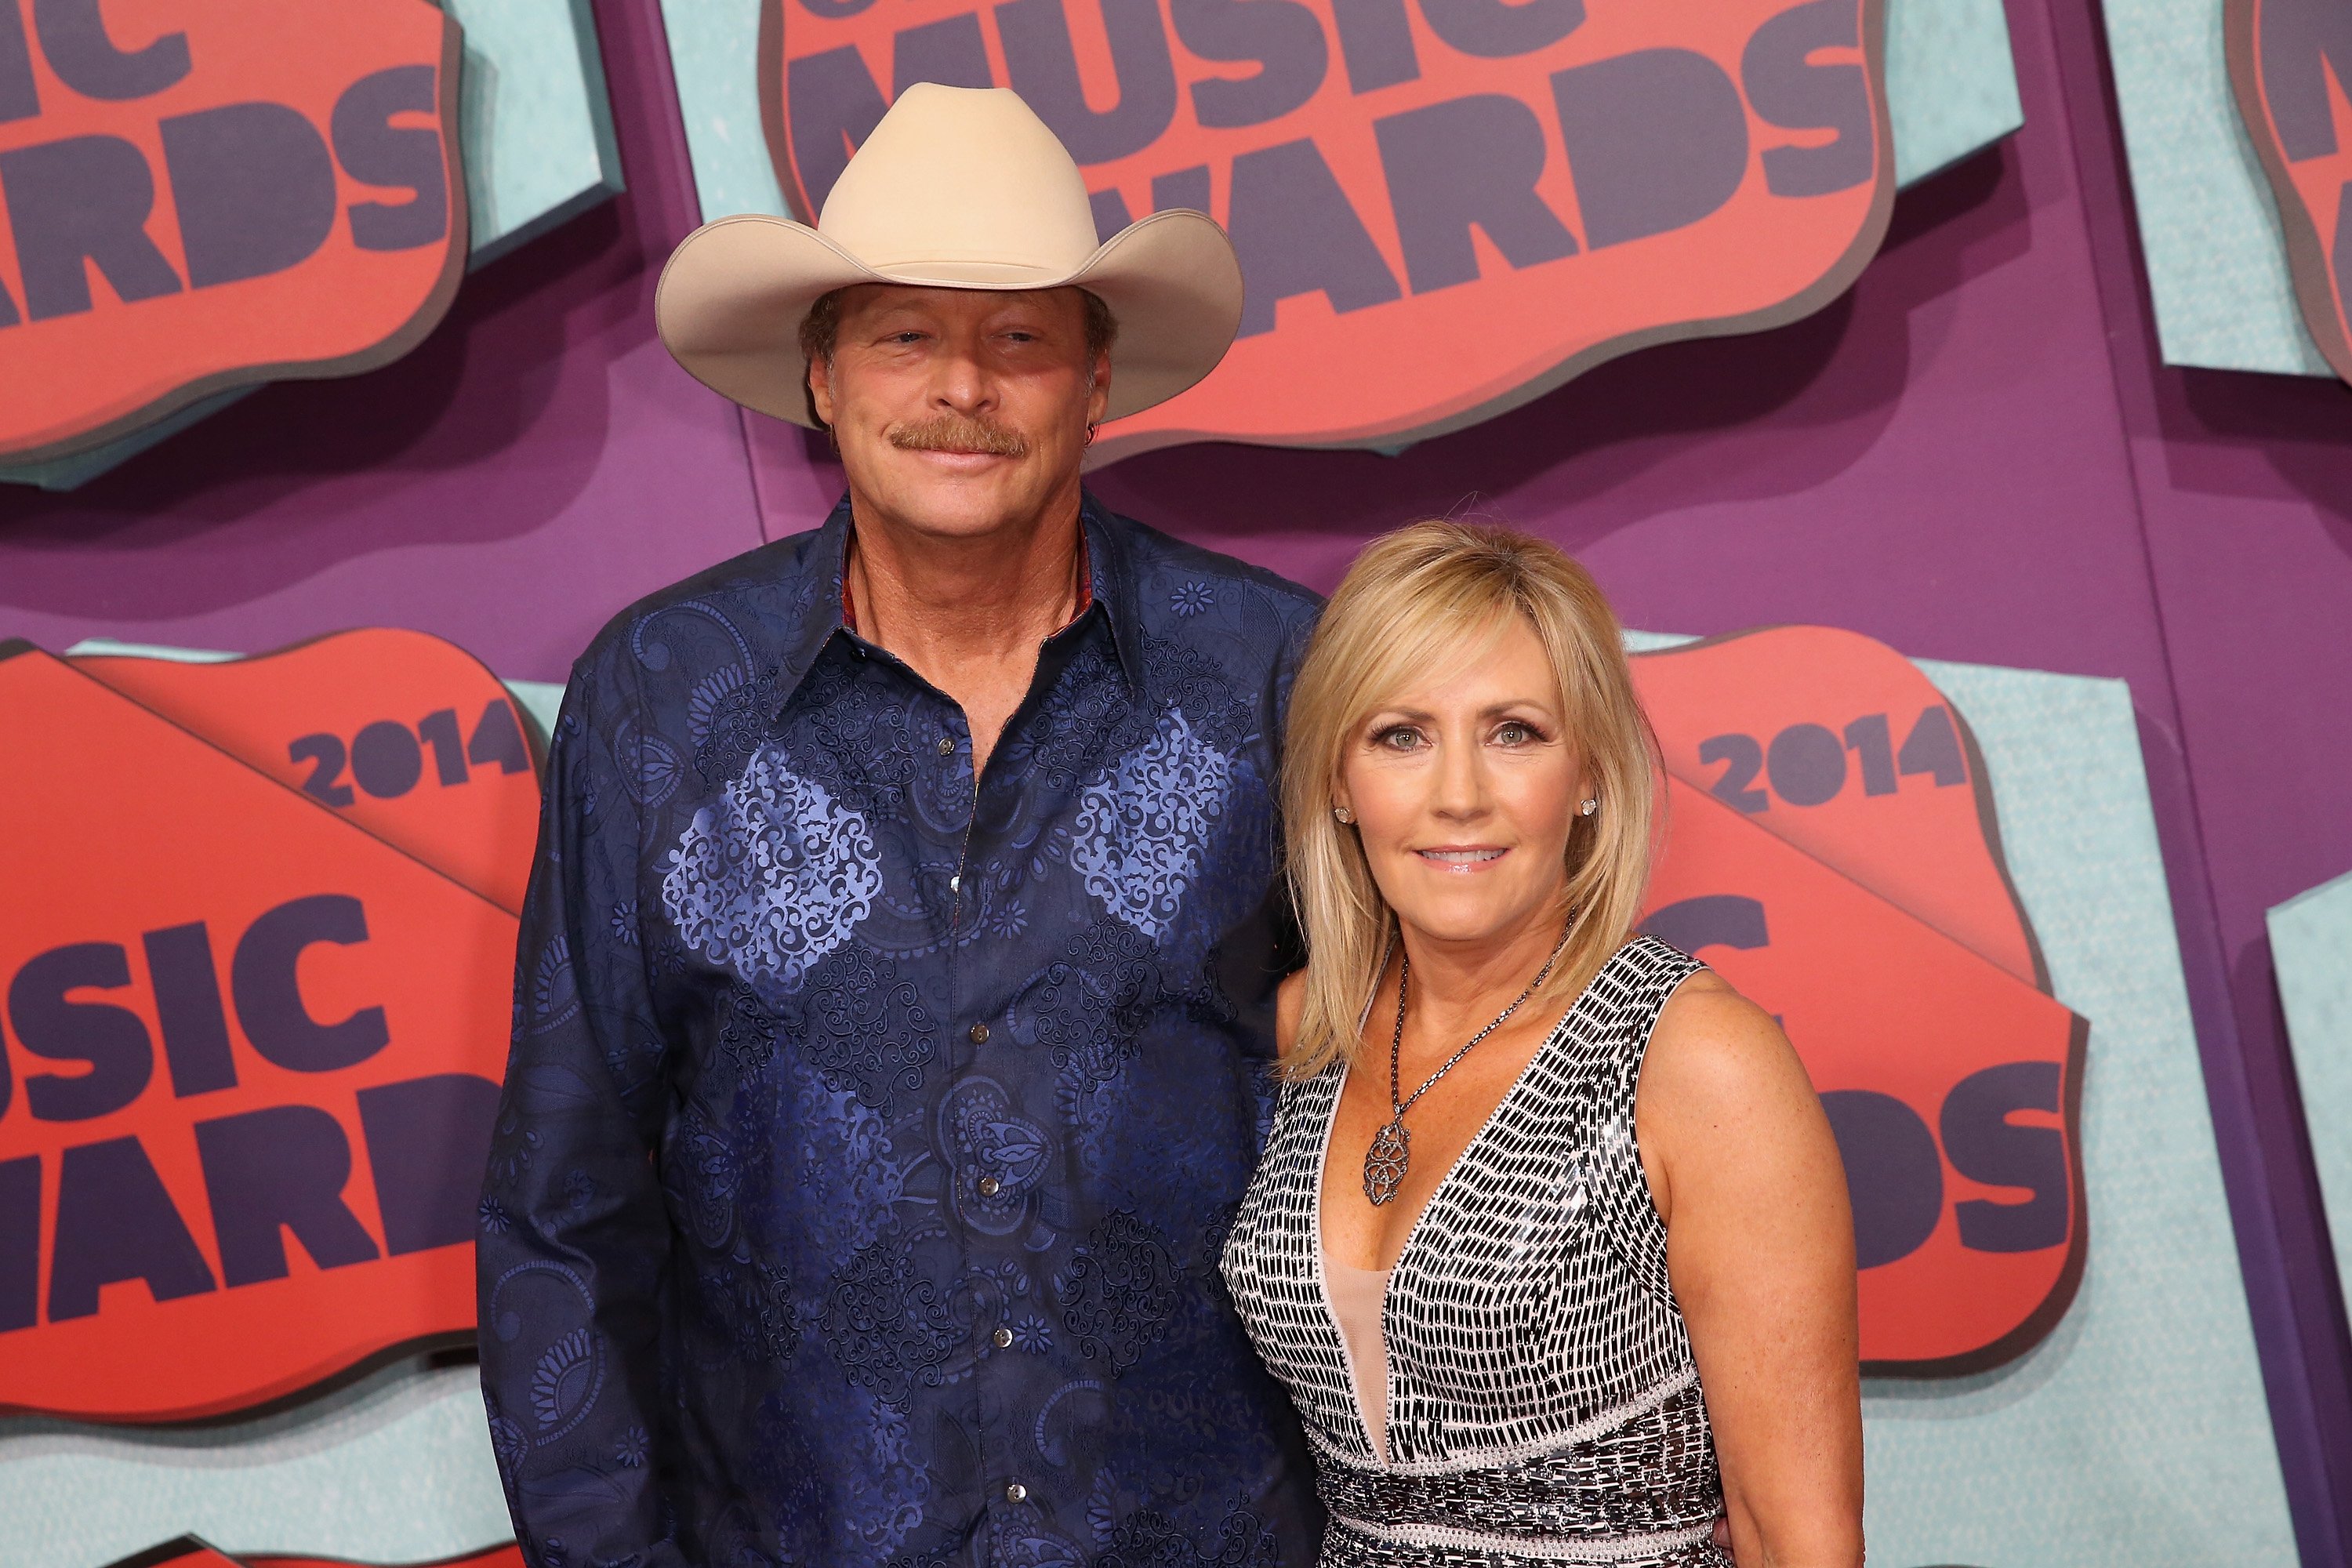 Singer-songwriter Alan Jackson and his wife Denise Jackson attend the 2014 CMT Music awards at the Bridgestone Arena on June 4, 2014 in Nashville, Tennessee ┃Source: Getty Images